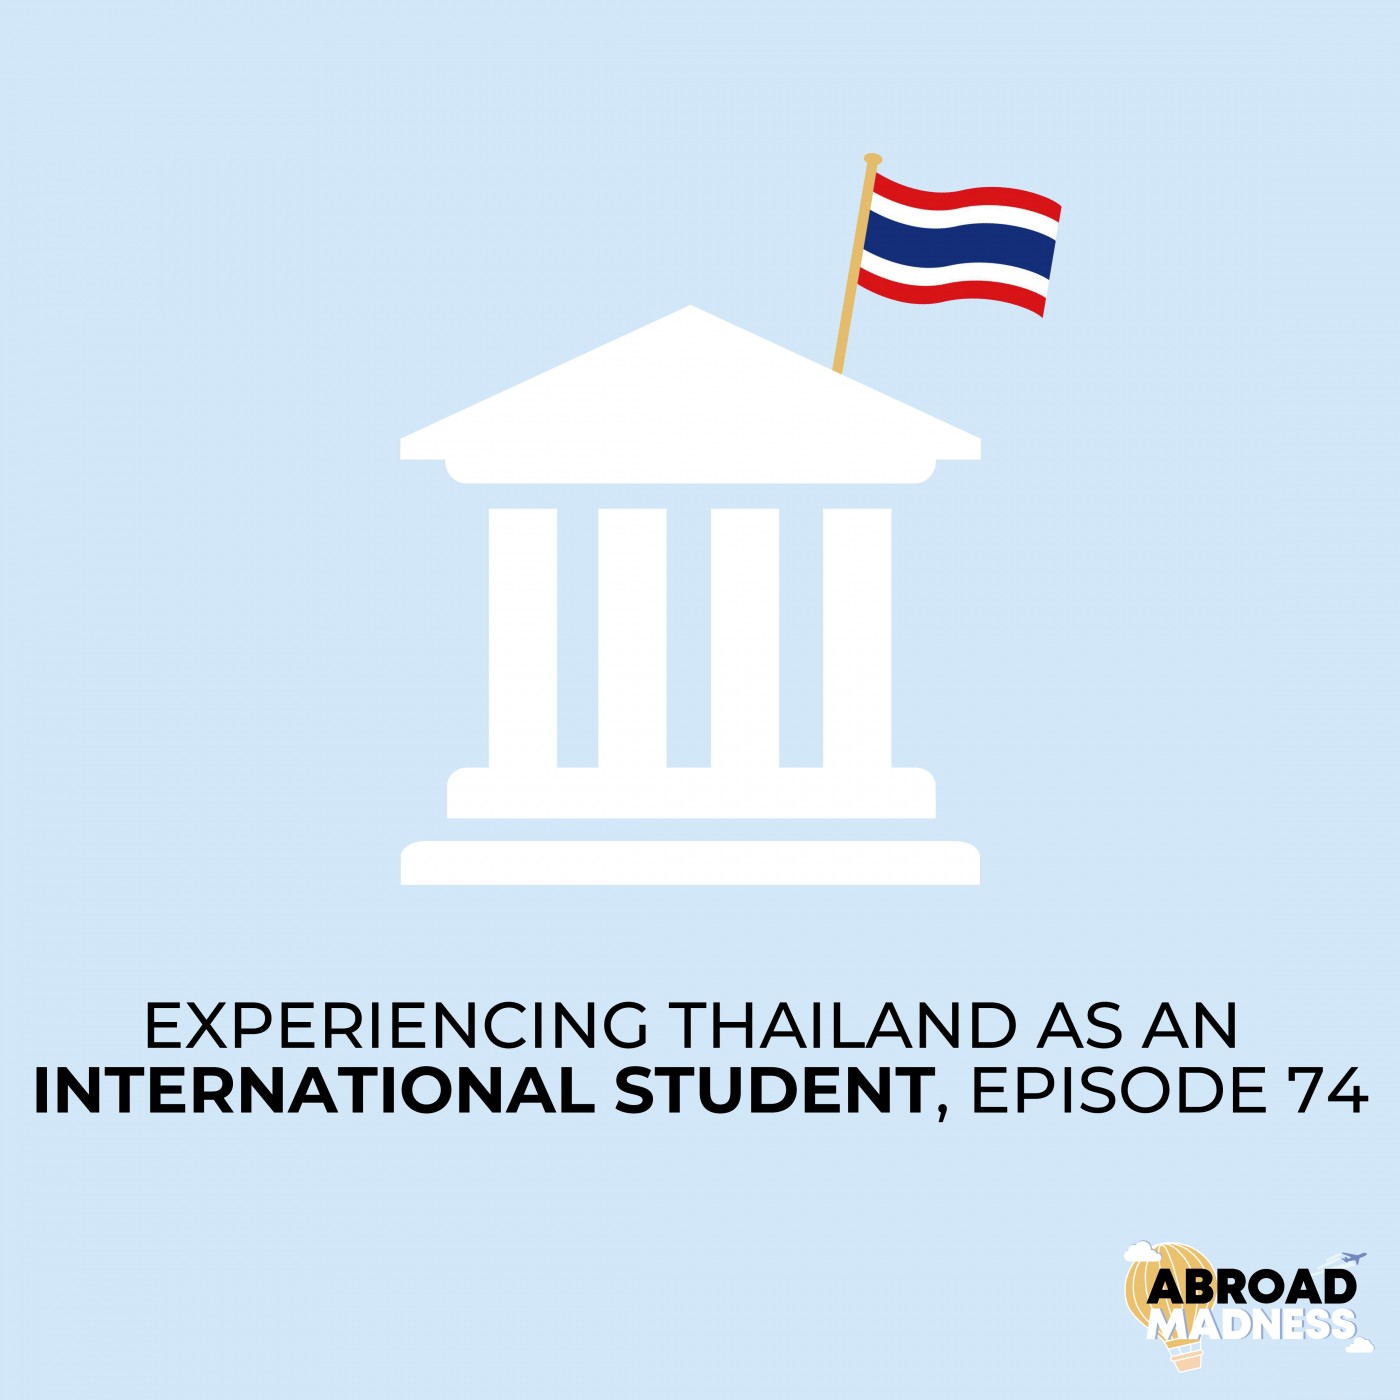 Experiencing Thailand as an International Student, Episode 74